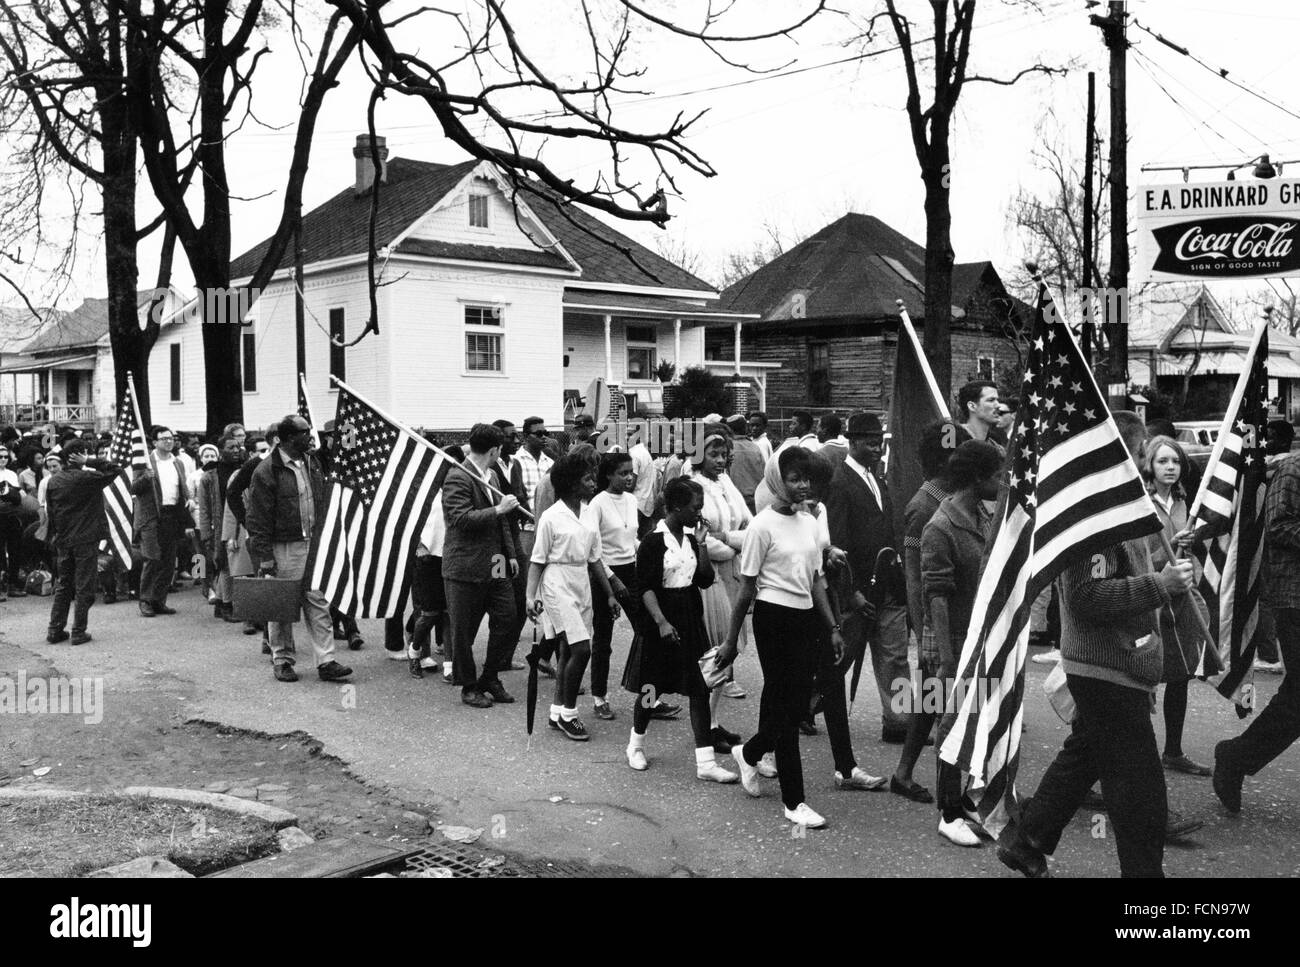 Selma march,1965. Participants in the Selma to Mongomery marches in 1965, Alabama, USA Stock Photo